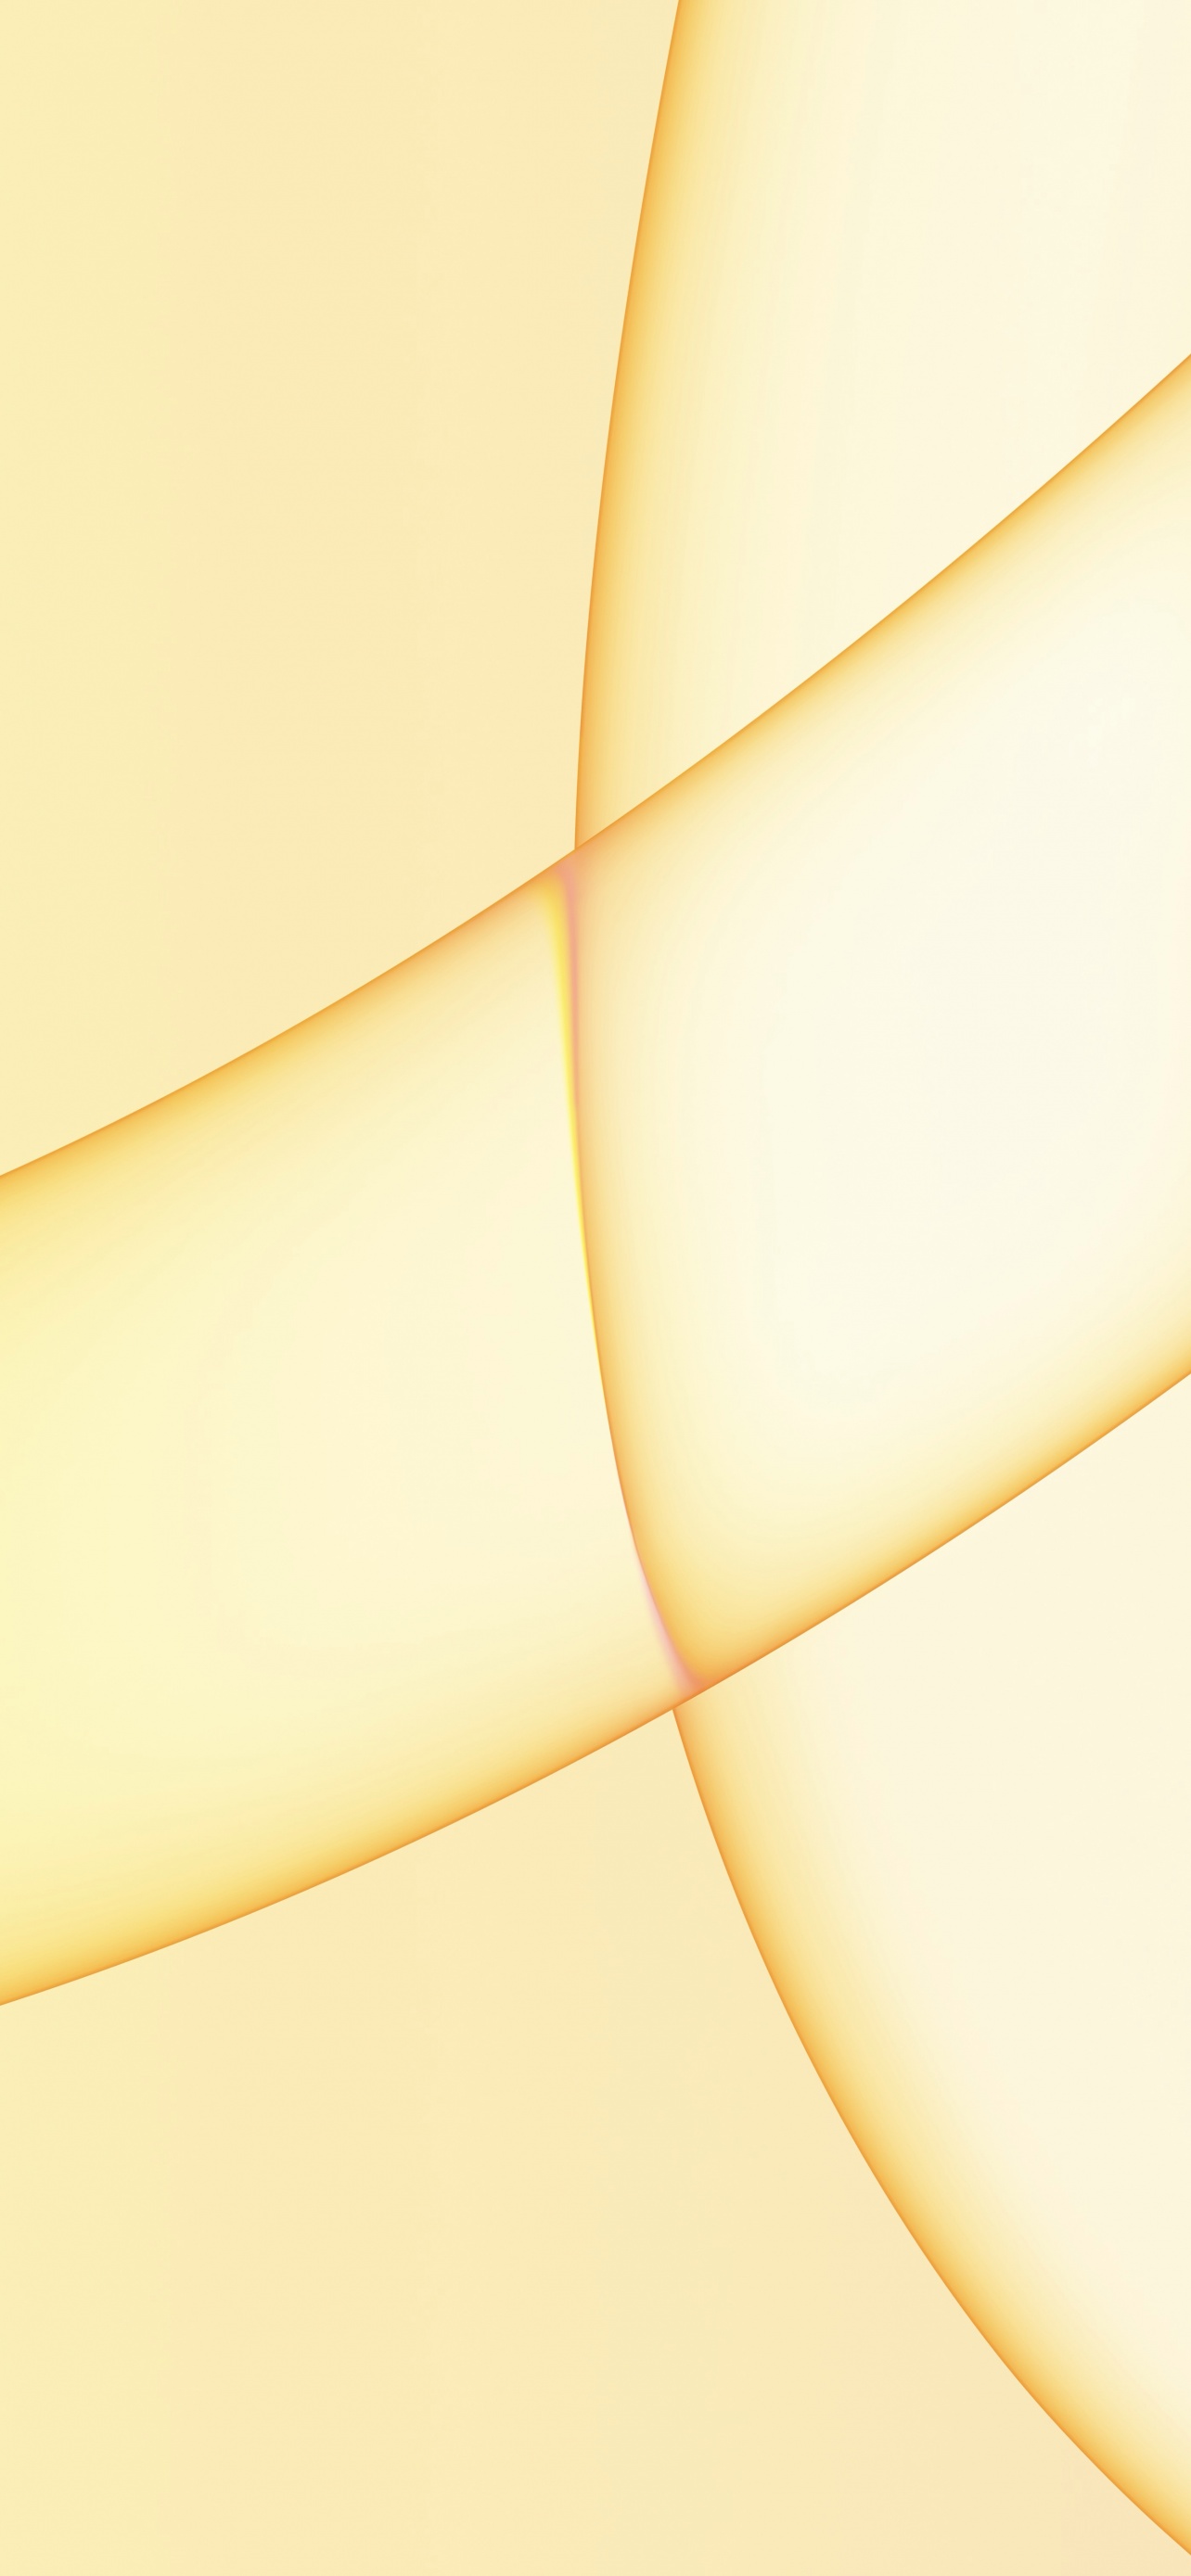 639 4k Yellow Photos, Pictures And Background Images For Free Download -  Pngtree